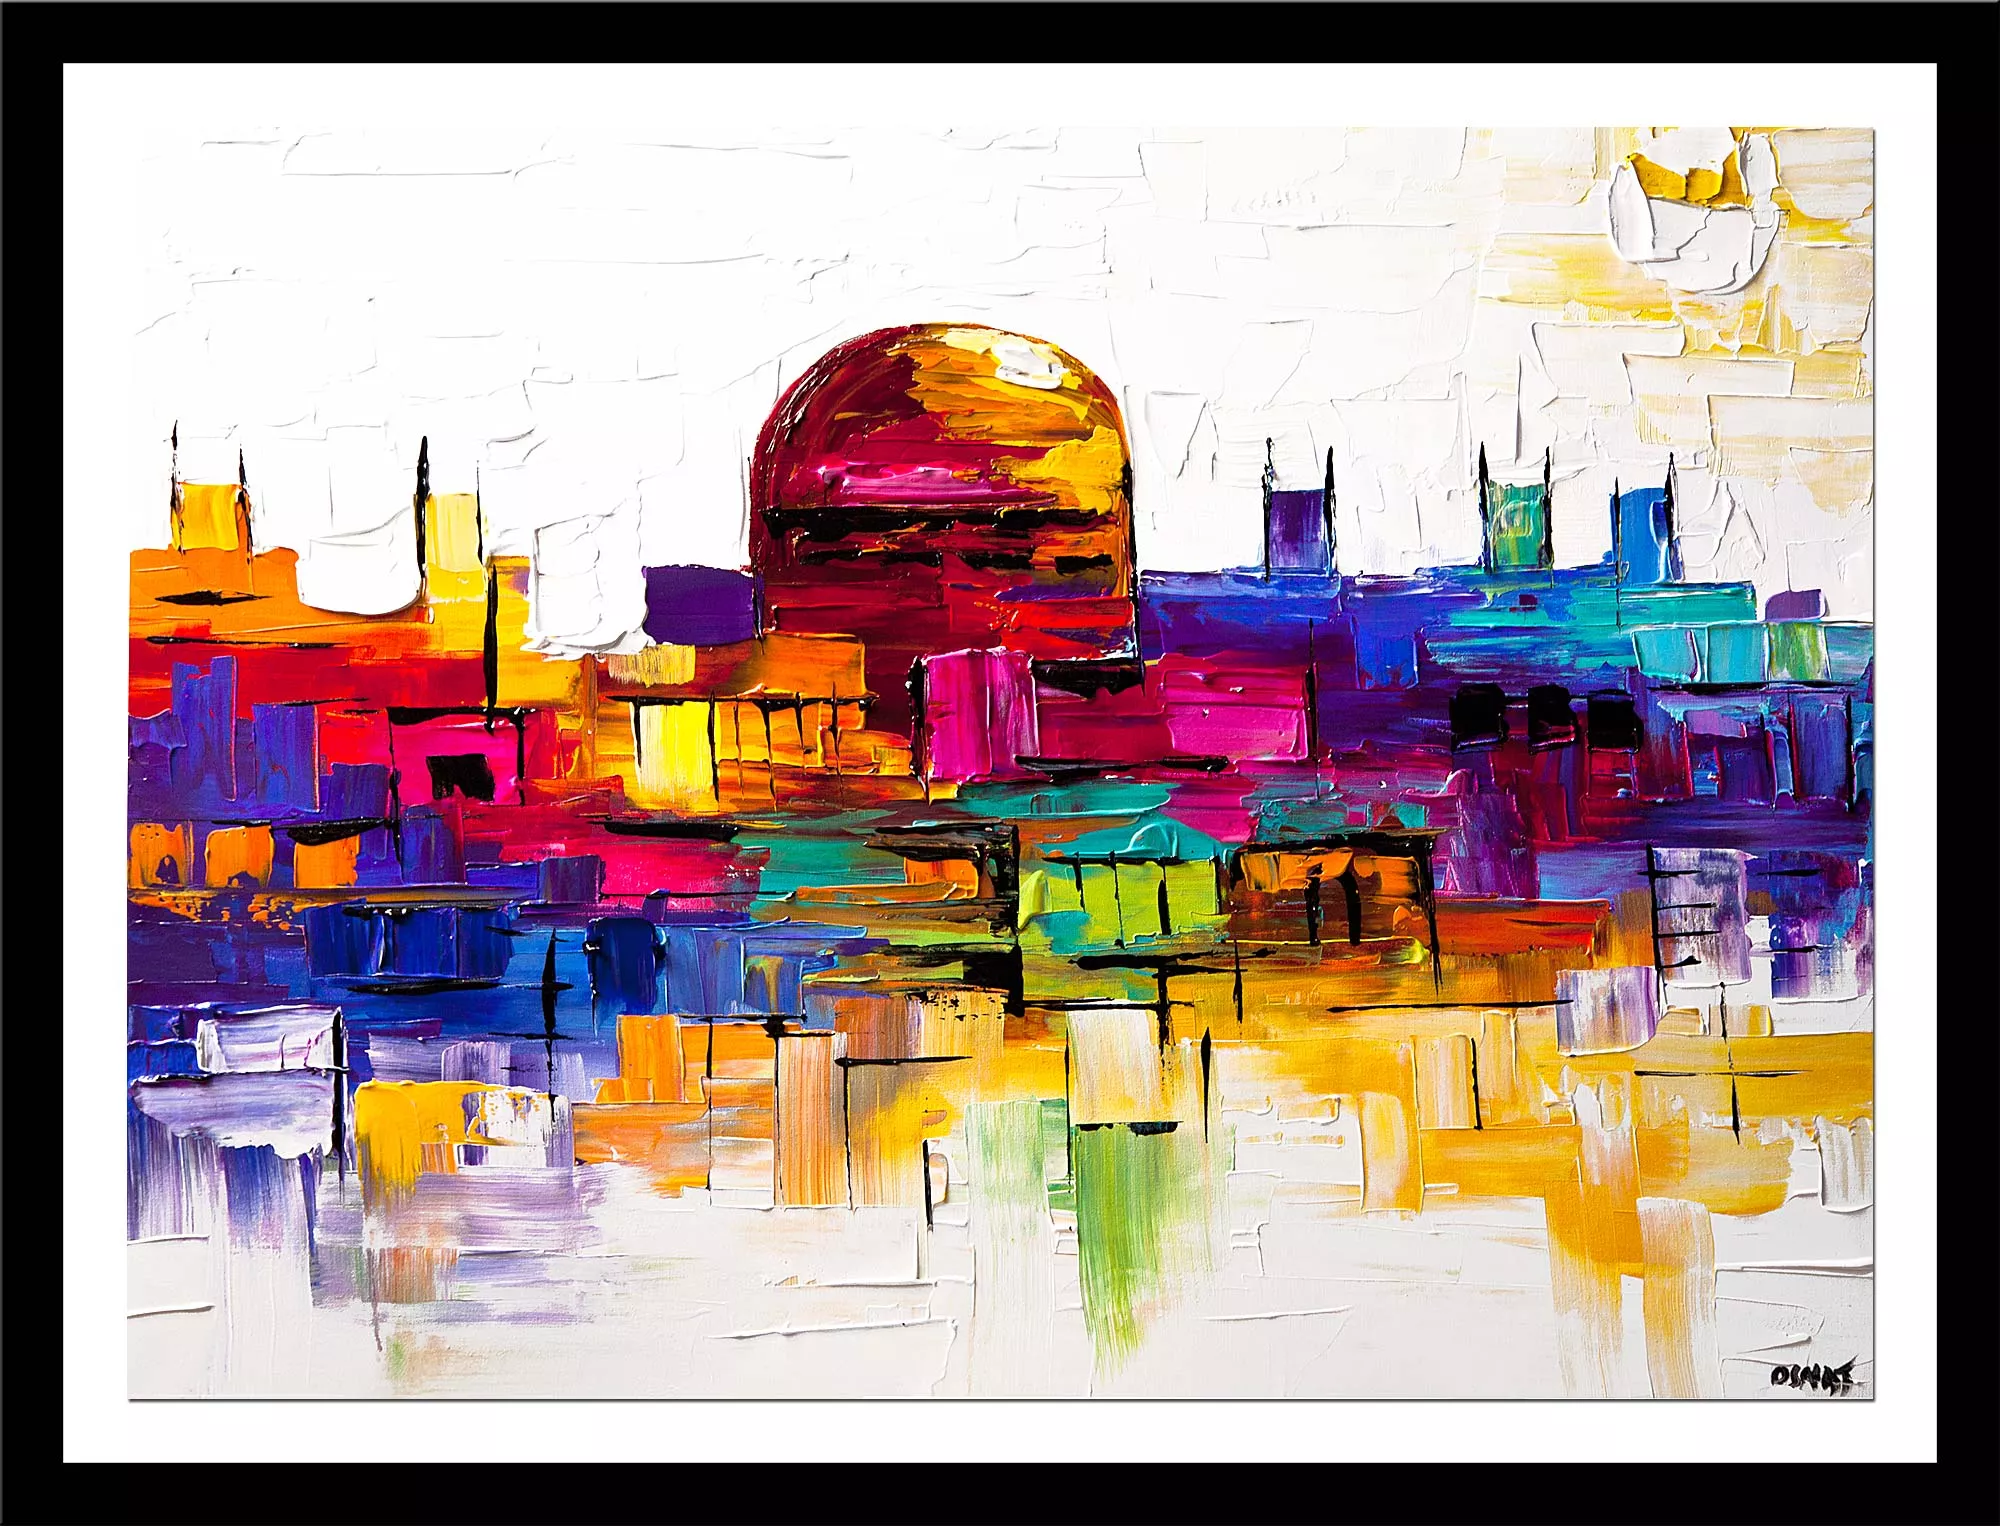 print on paper - canvas print of colorful painting of jerusalem golden dome